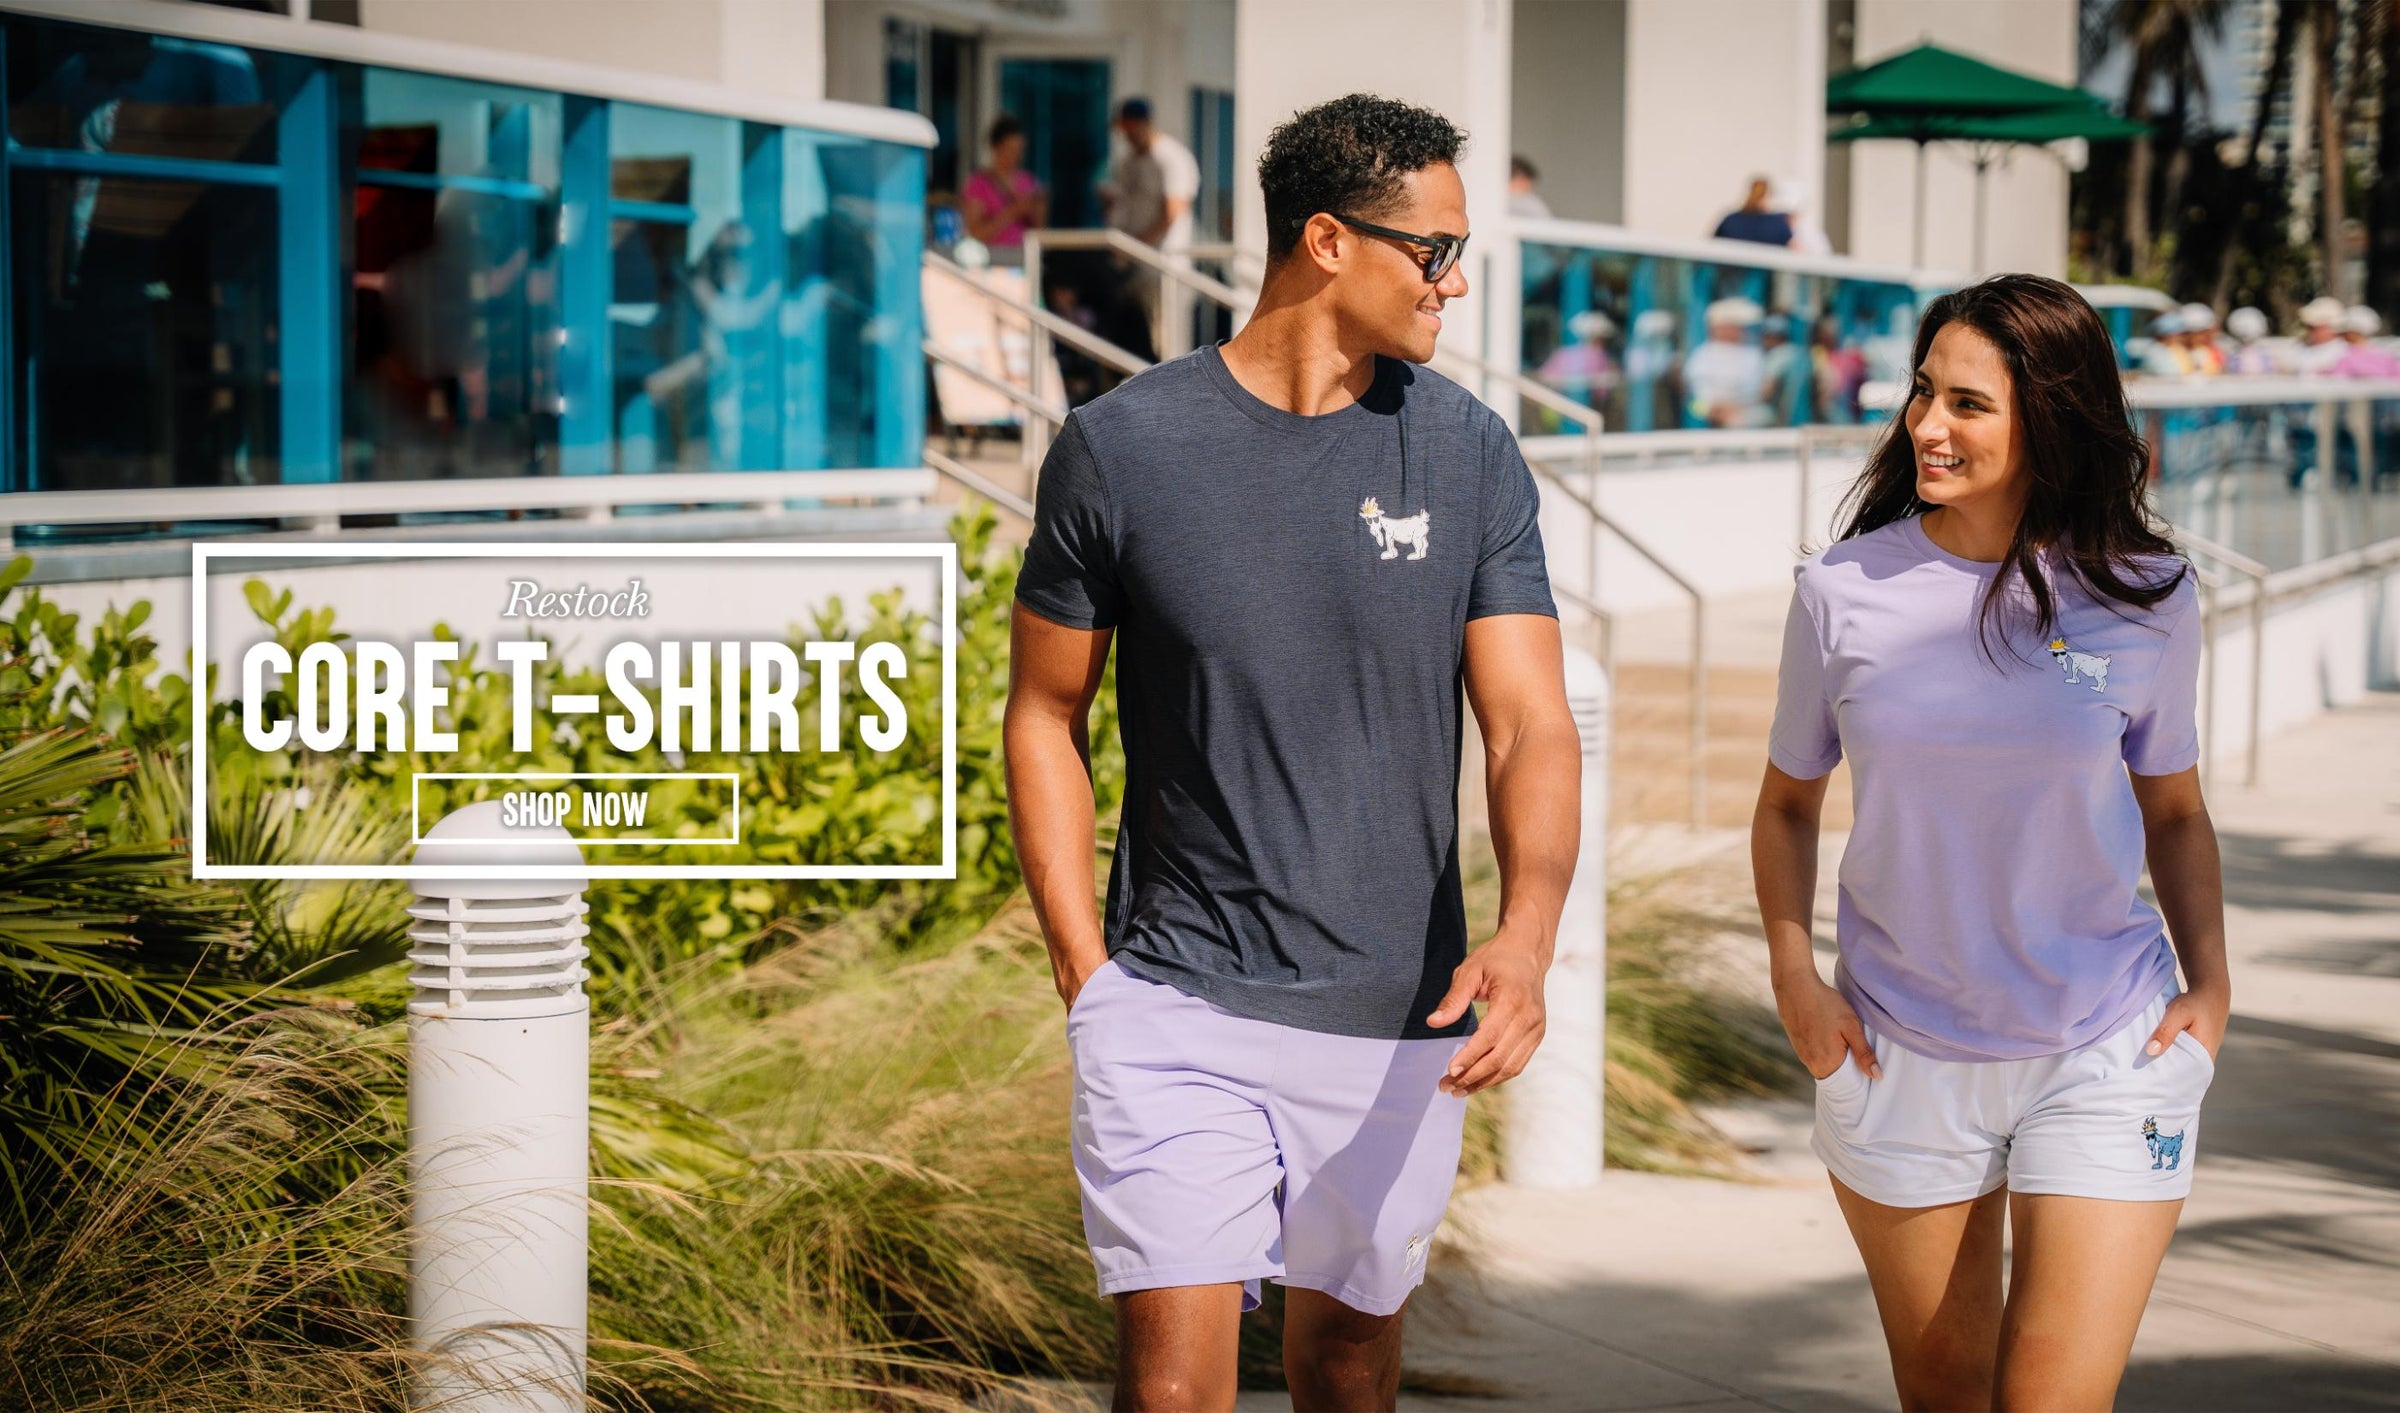 Man and woman walking through beach town on a sunny day with text that reads "Restock Core T-Shirts Shop Now"